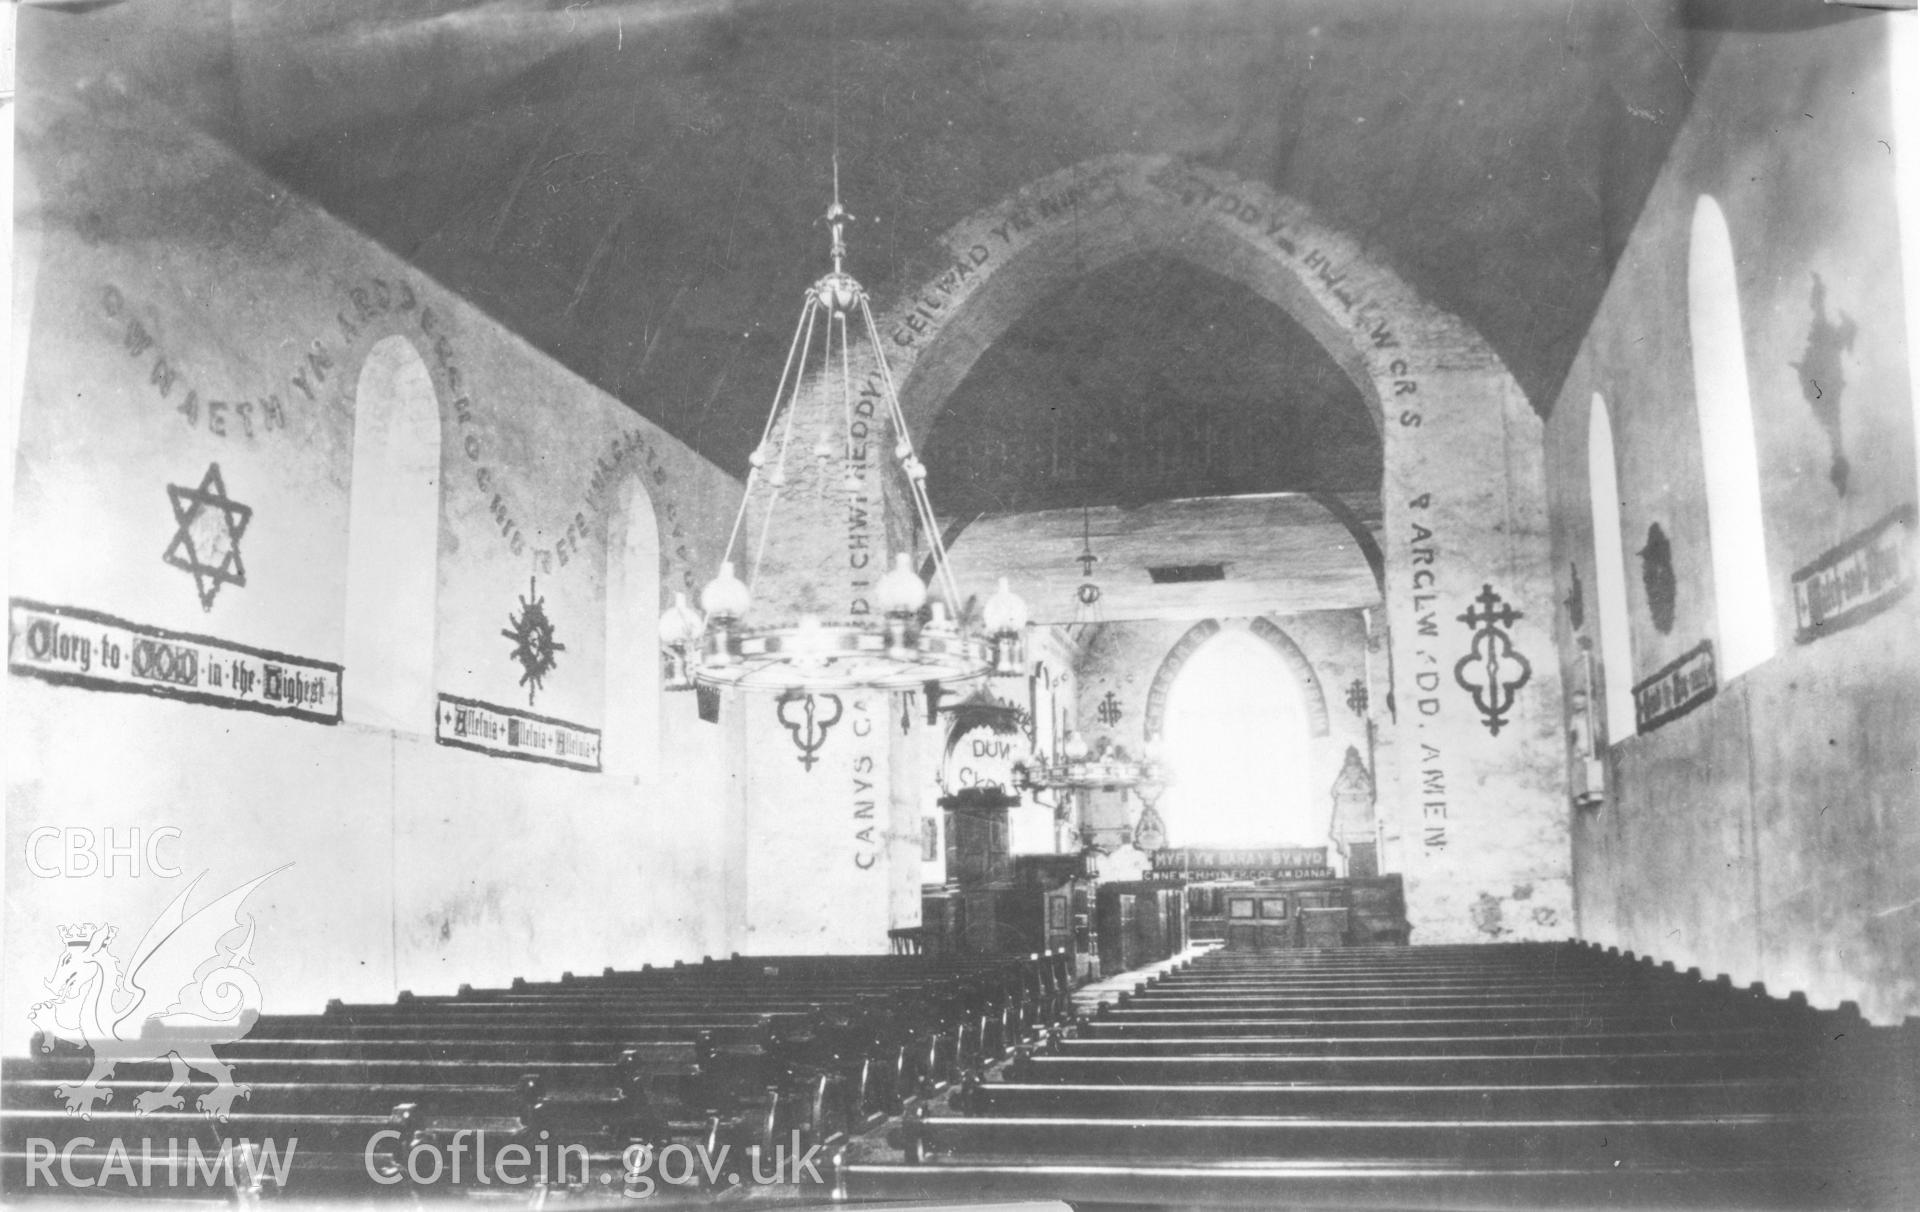 Black and white acetate negative showing an interior view of Llanbadarn Fawr church prior to restoration.